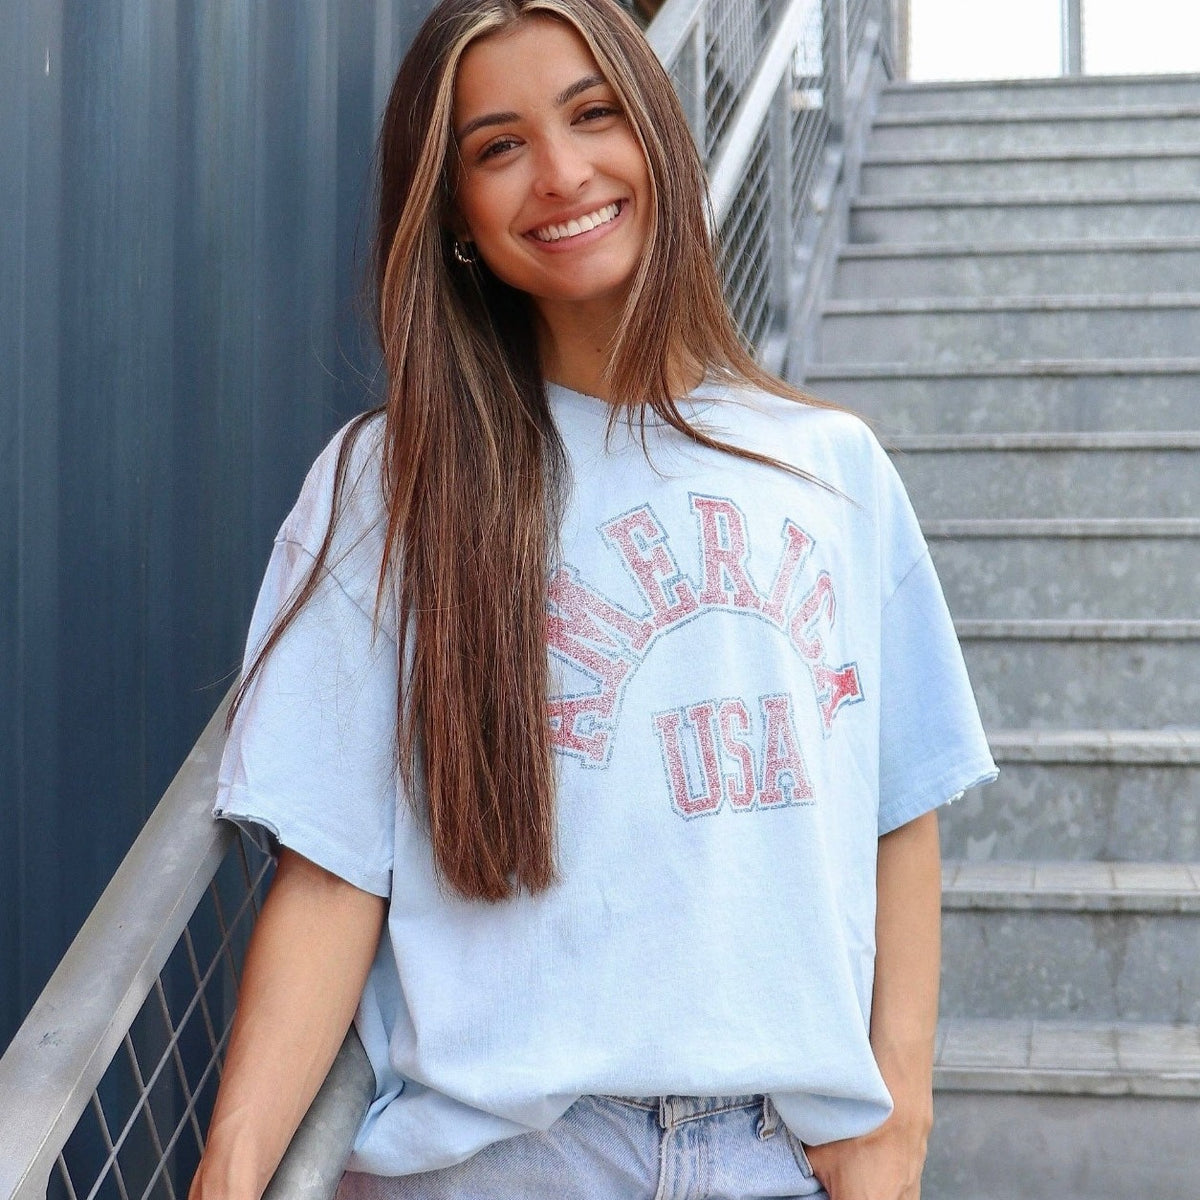 Young female standing on stairs wearing oversized white graphic t-shirt that says "America USA" in blue and red letters